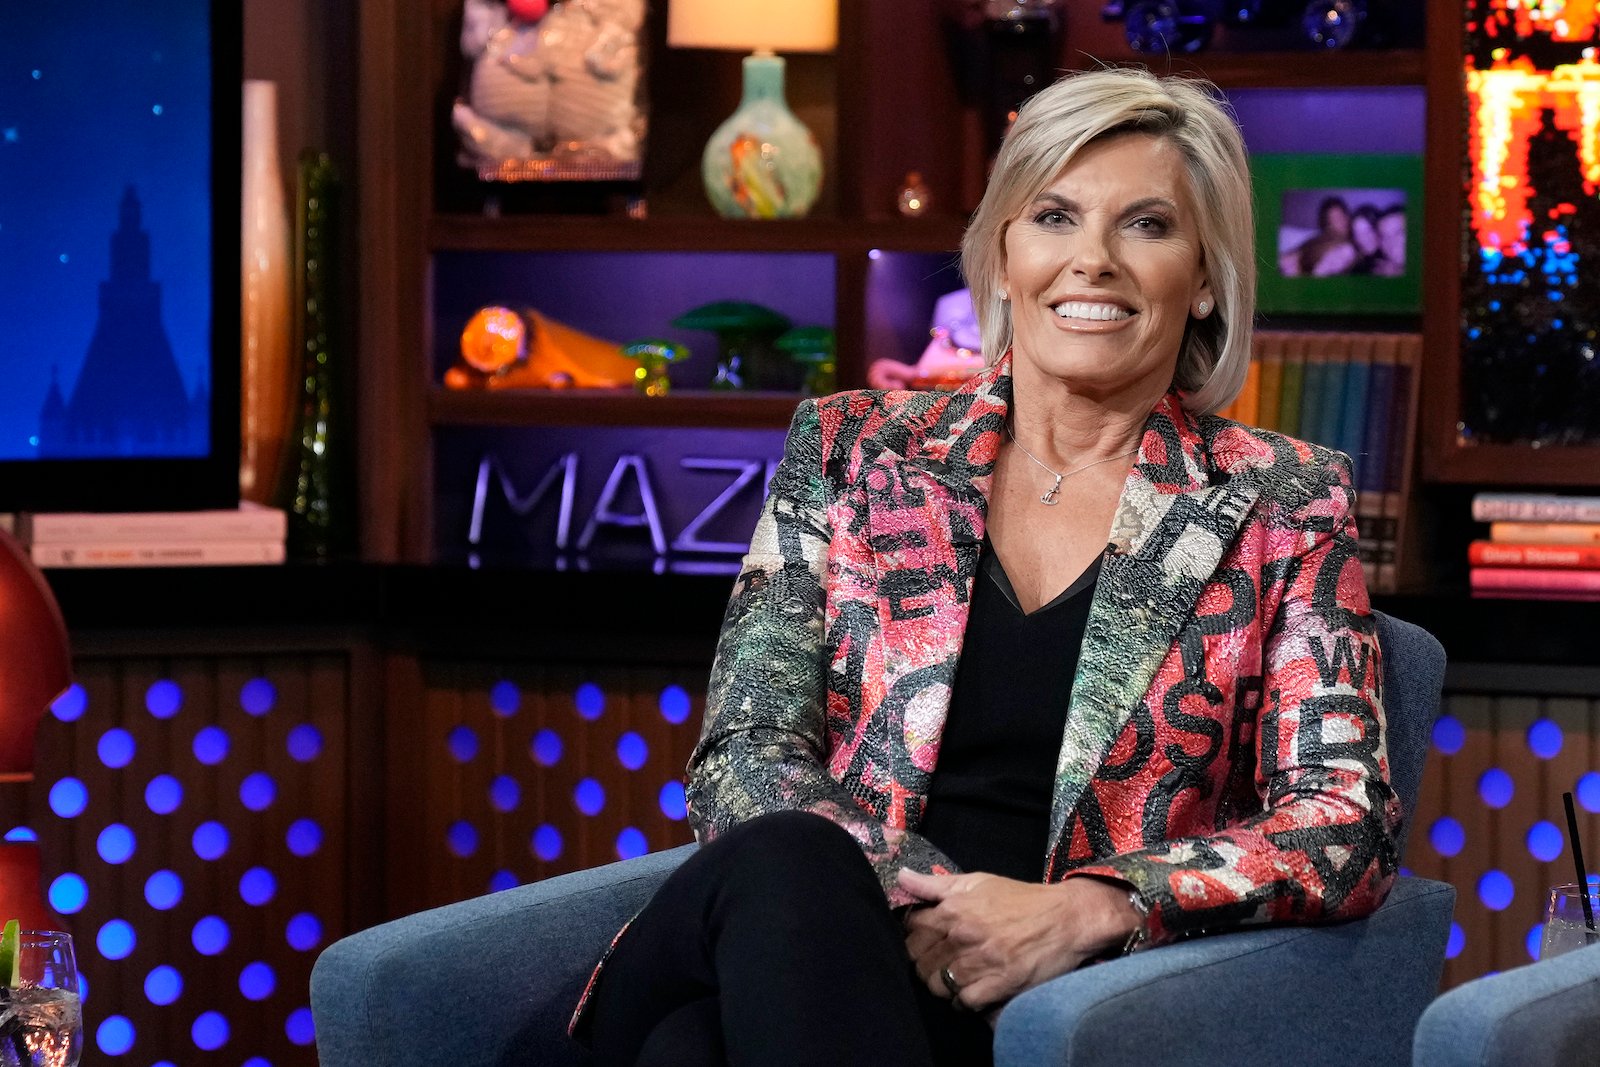 Capt. Sandy Yawn from 'Below Deck Med' sits in a chair on 'WWHL'